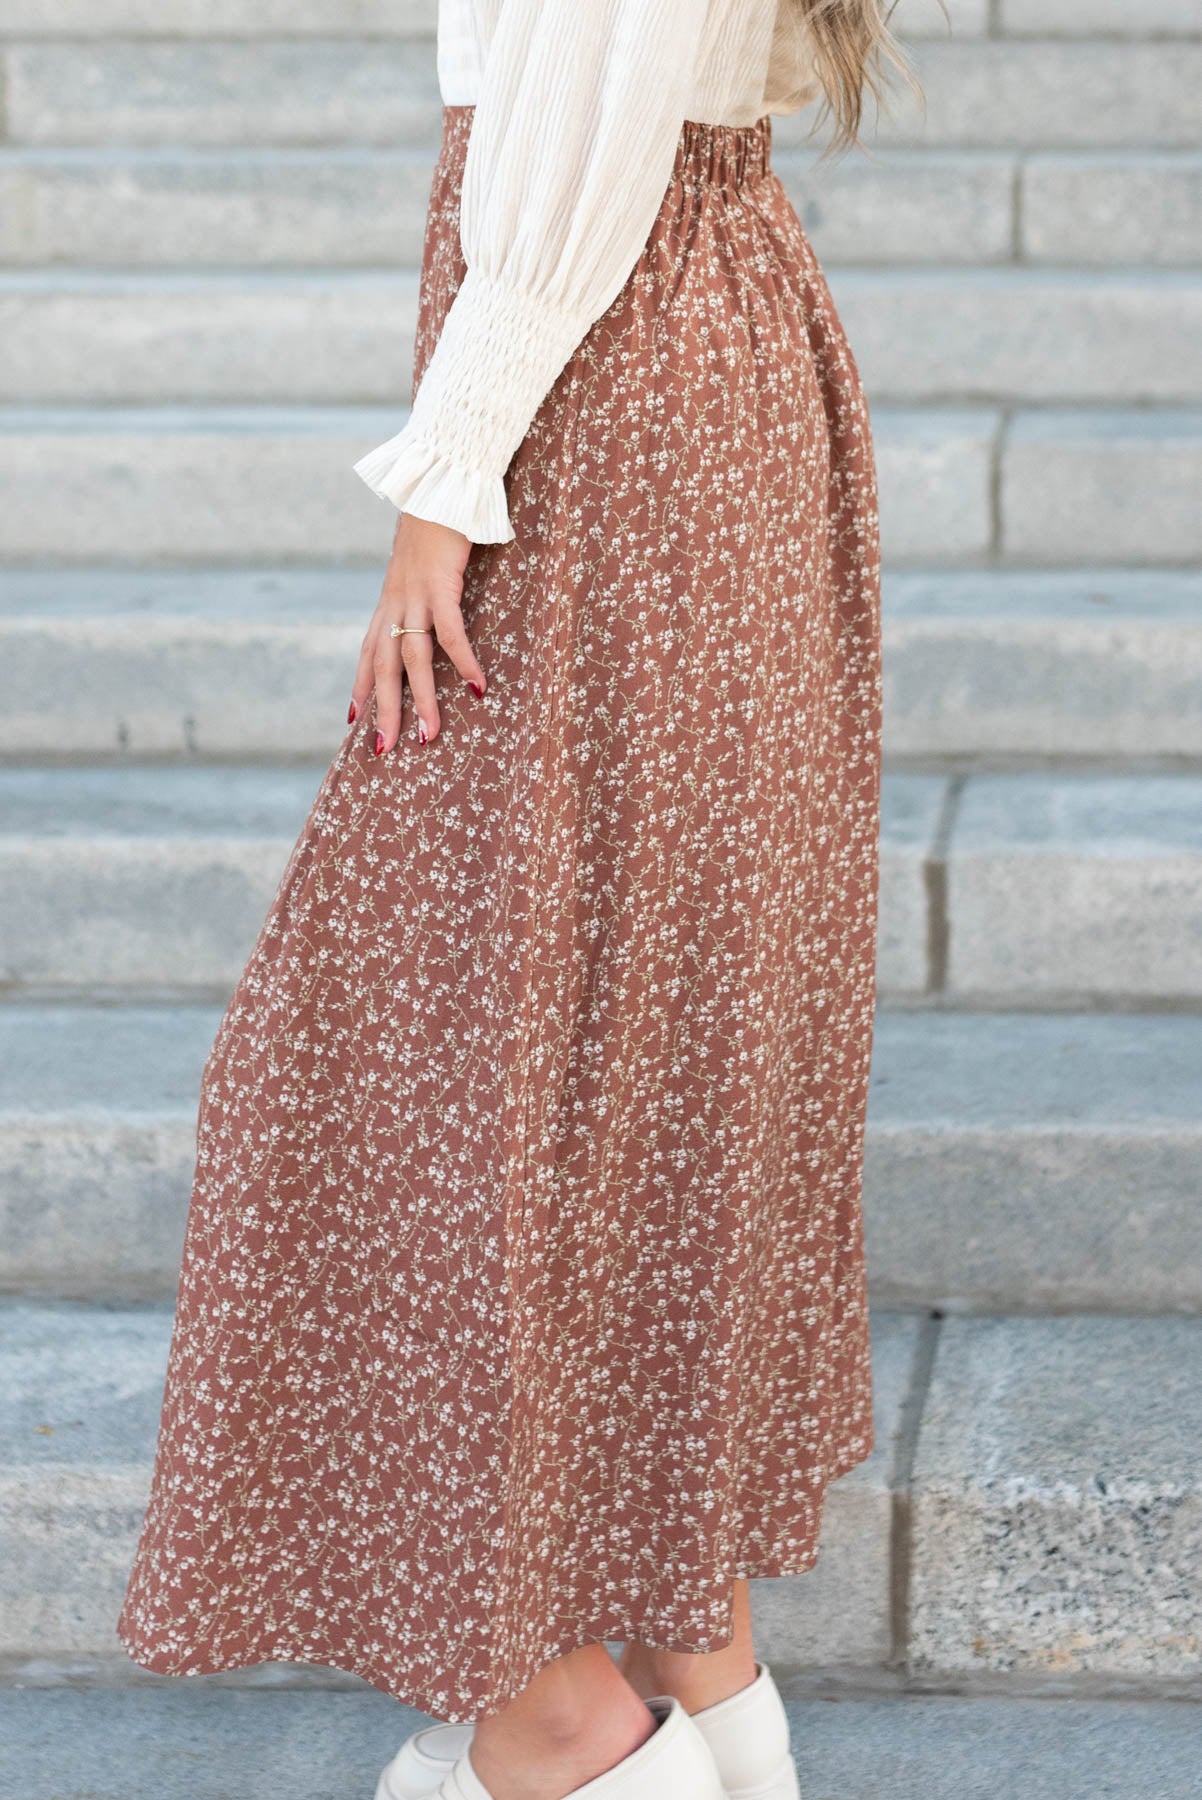 Side view of the chestnut floral skirt